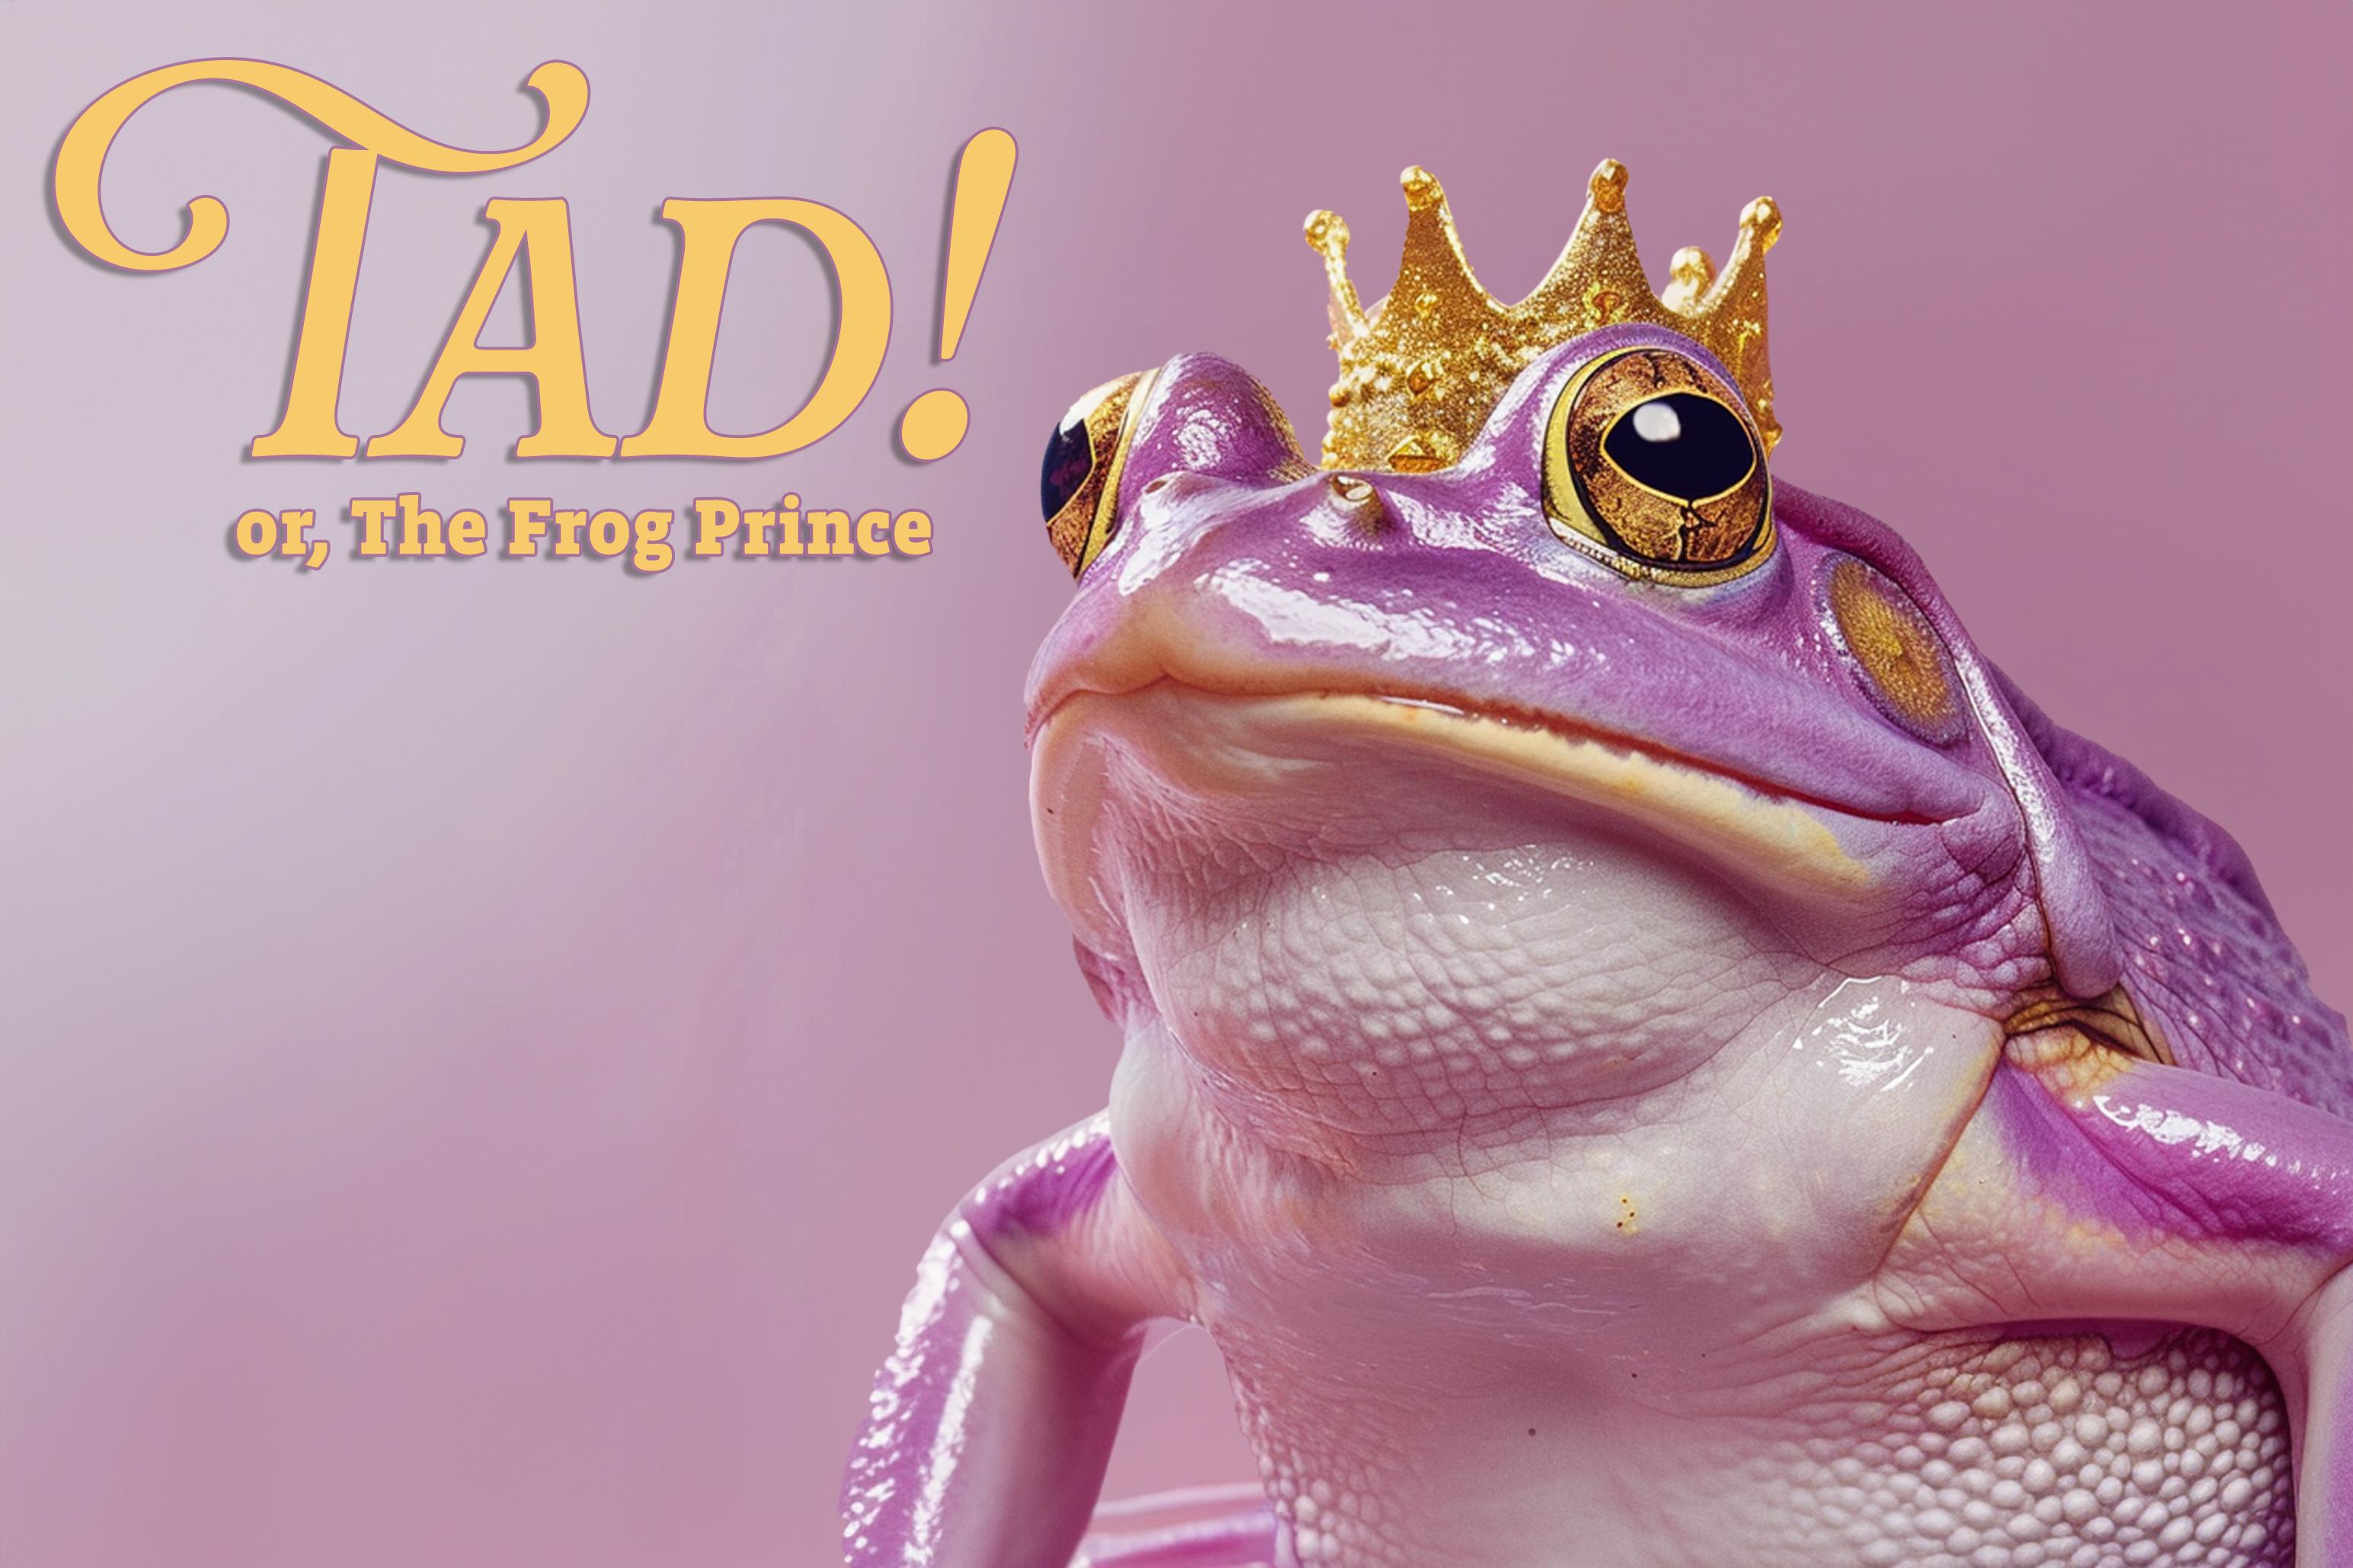 Uproar Theatrics - Tad! or, The Frog Prince